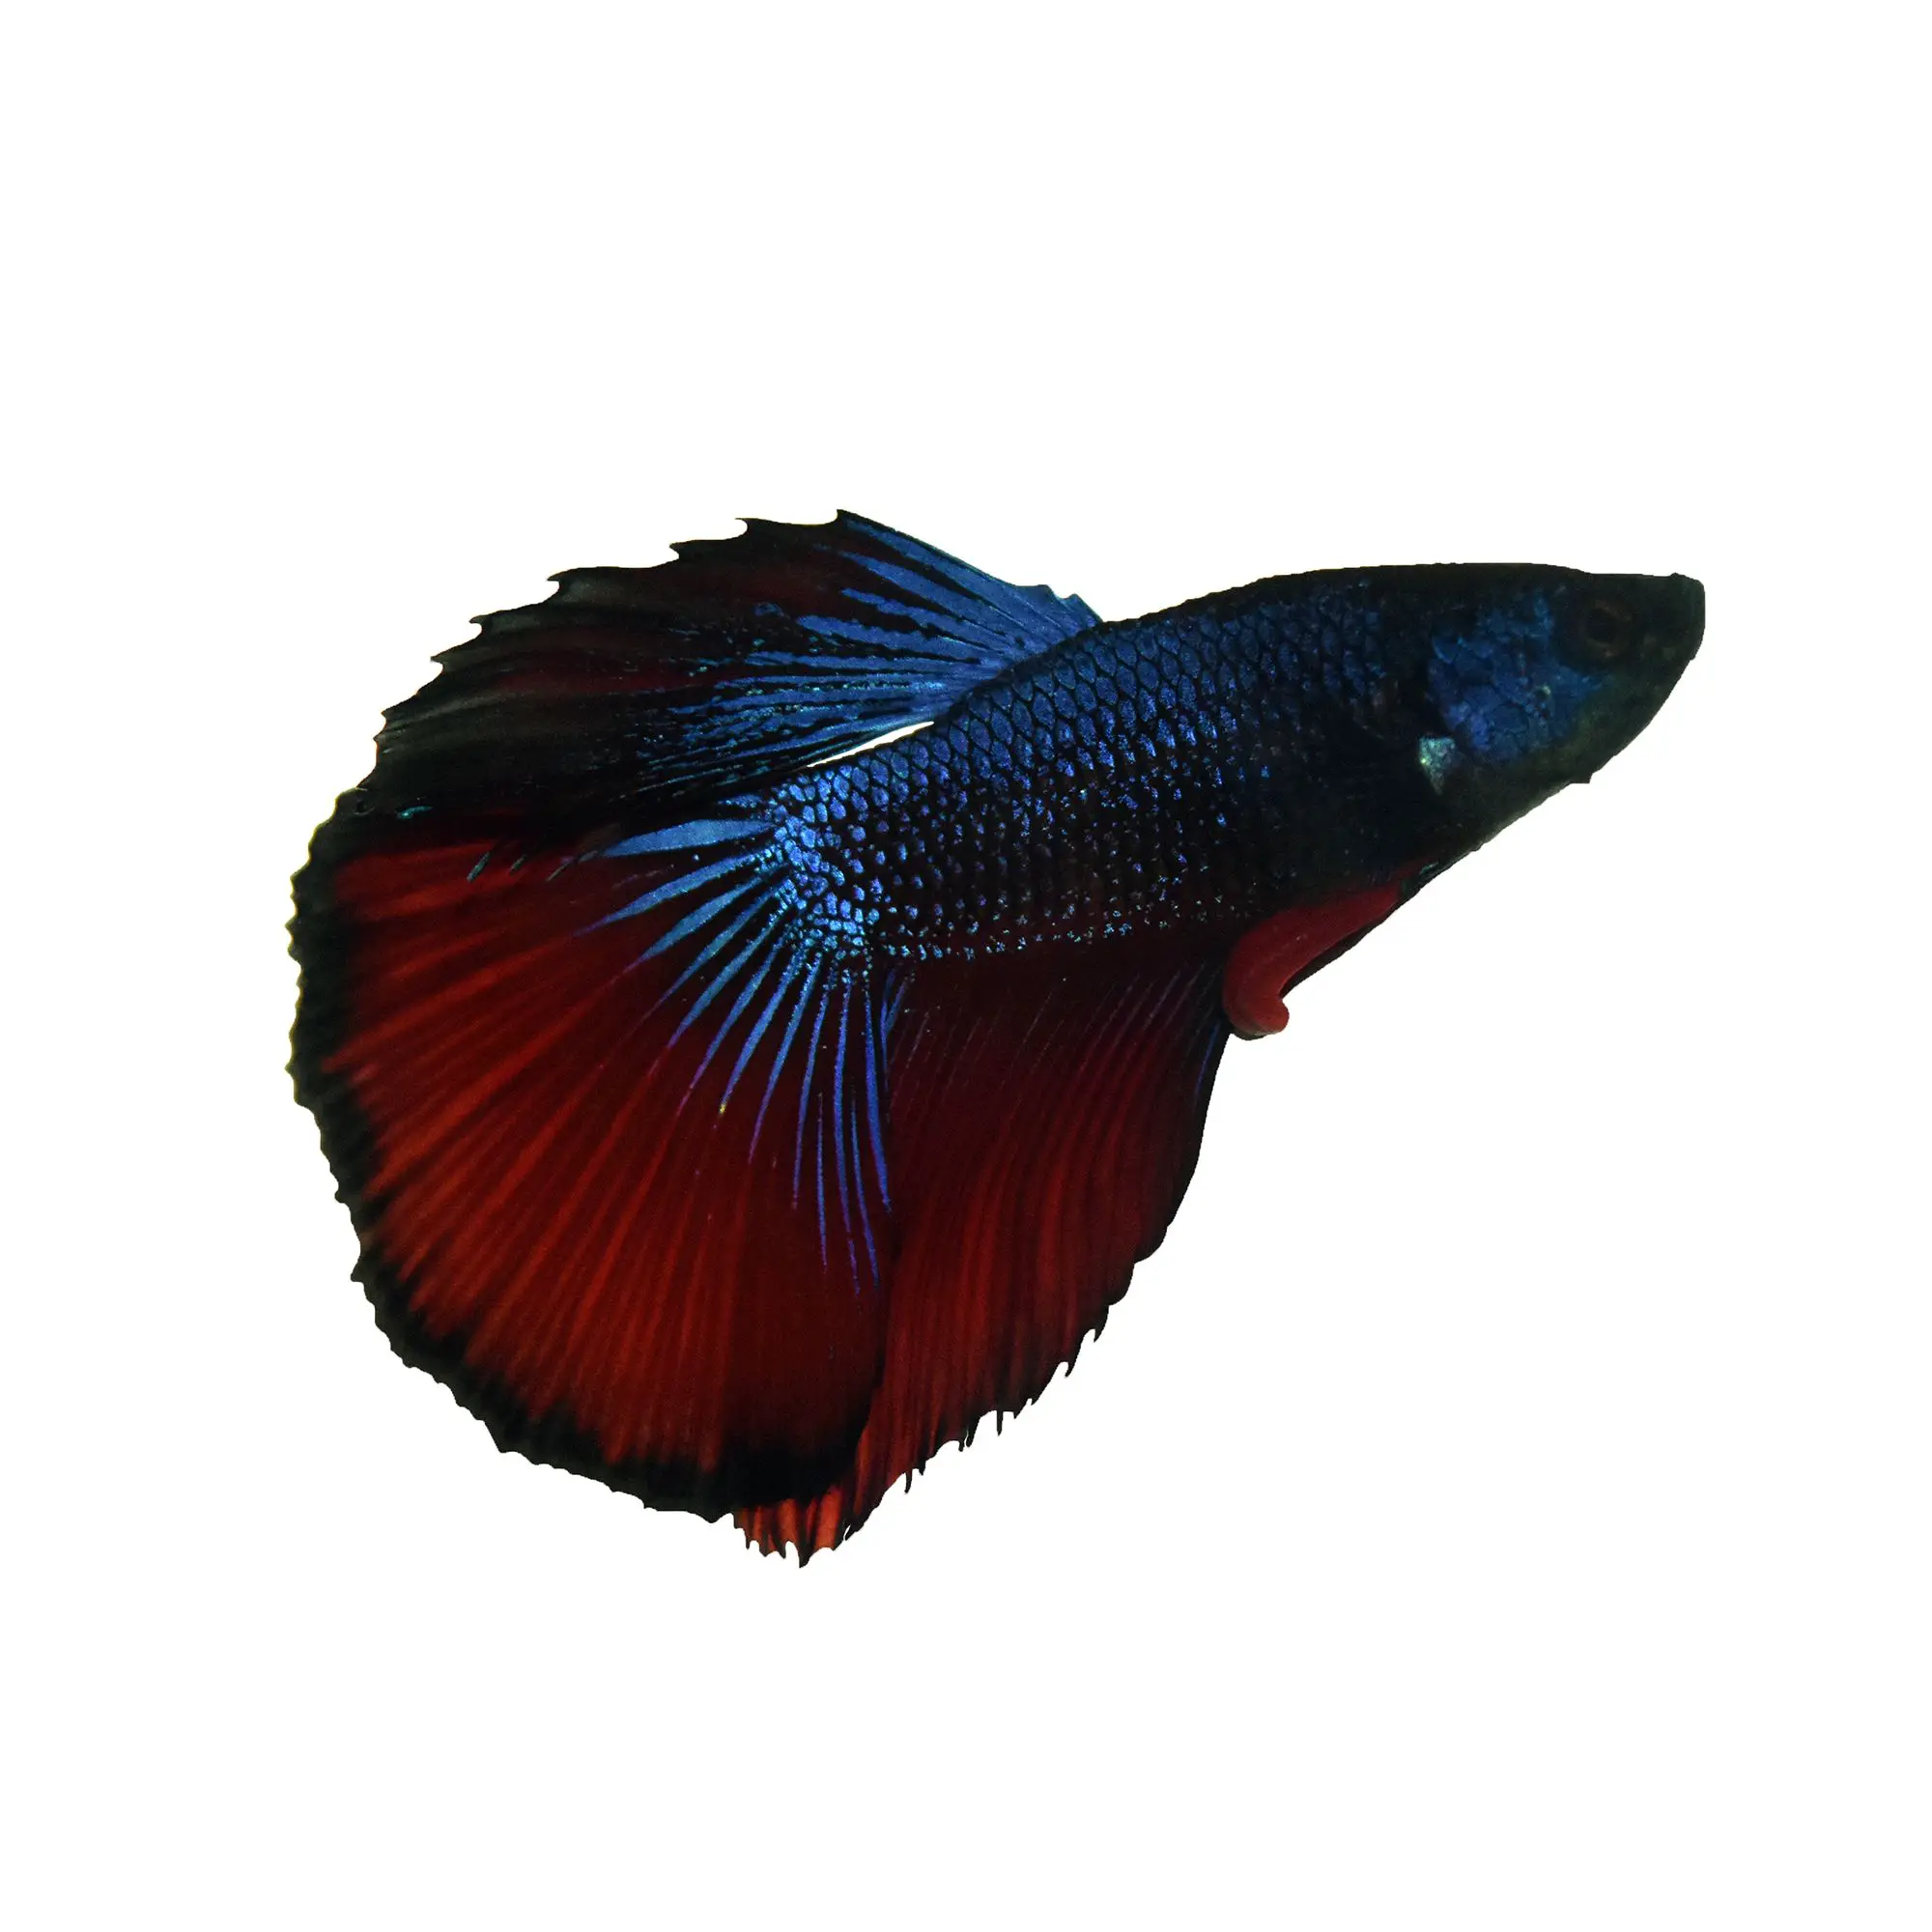 How Old Are Betta Fish at Petsmart? 2